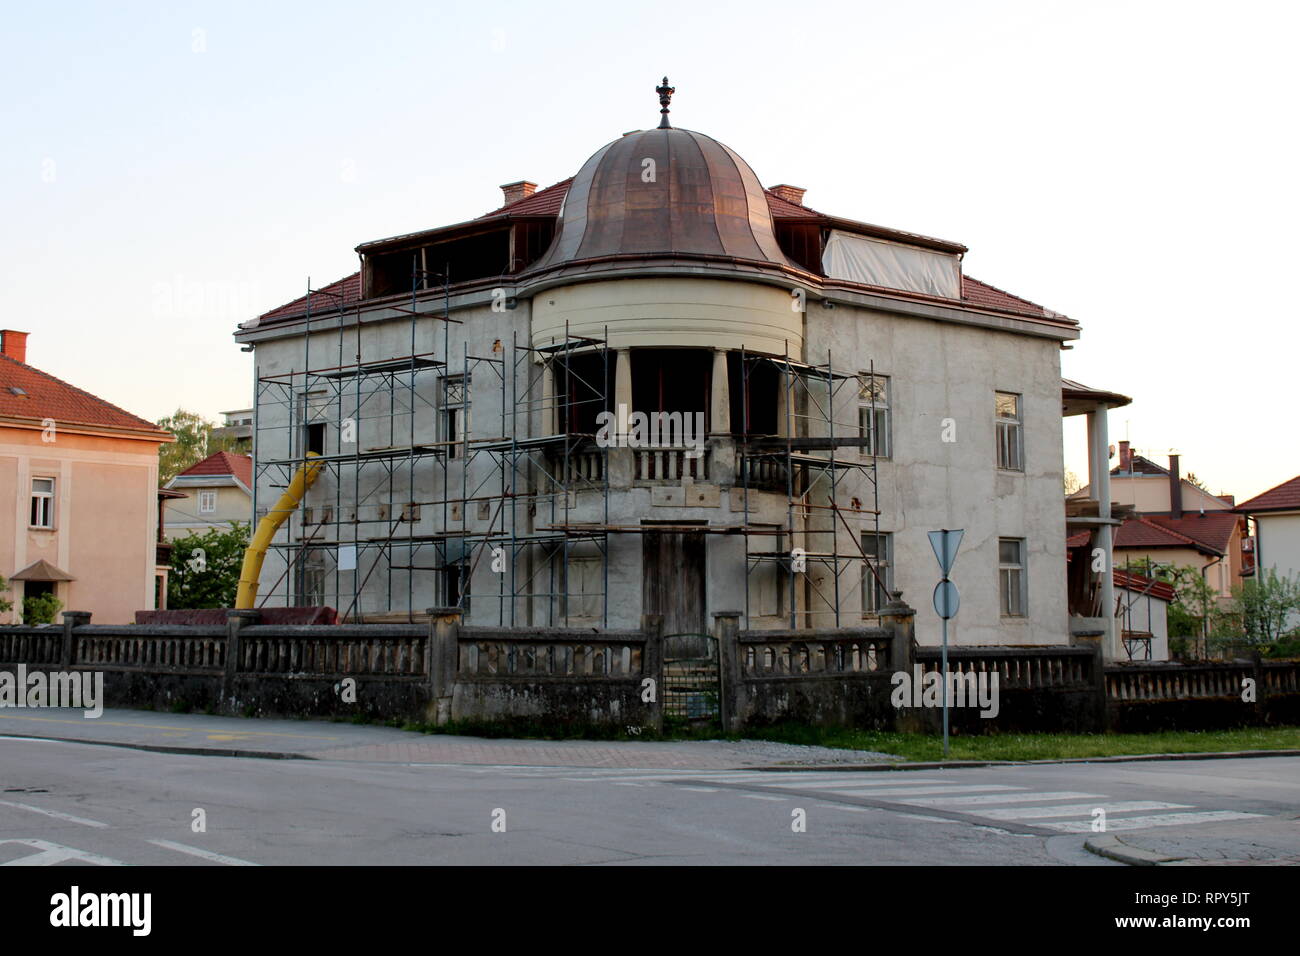 Old villa under complete reconstruction from outer facade to inner rooms with scaffolding and construction material located on crossroads Stock Photo